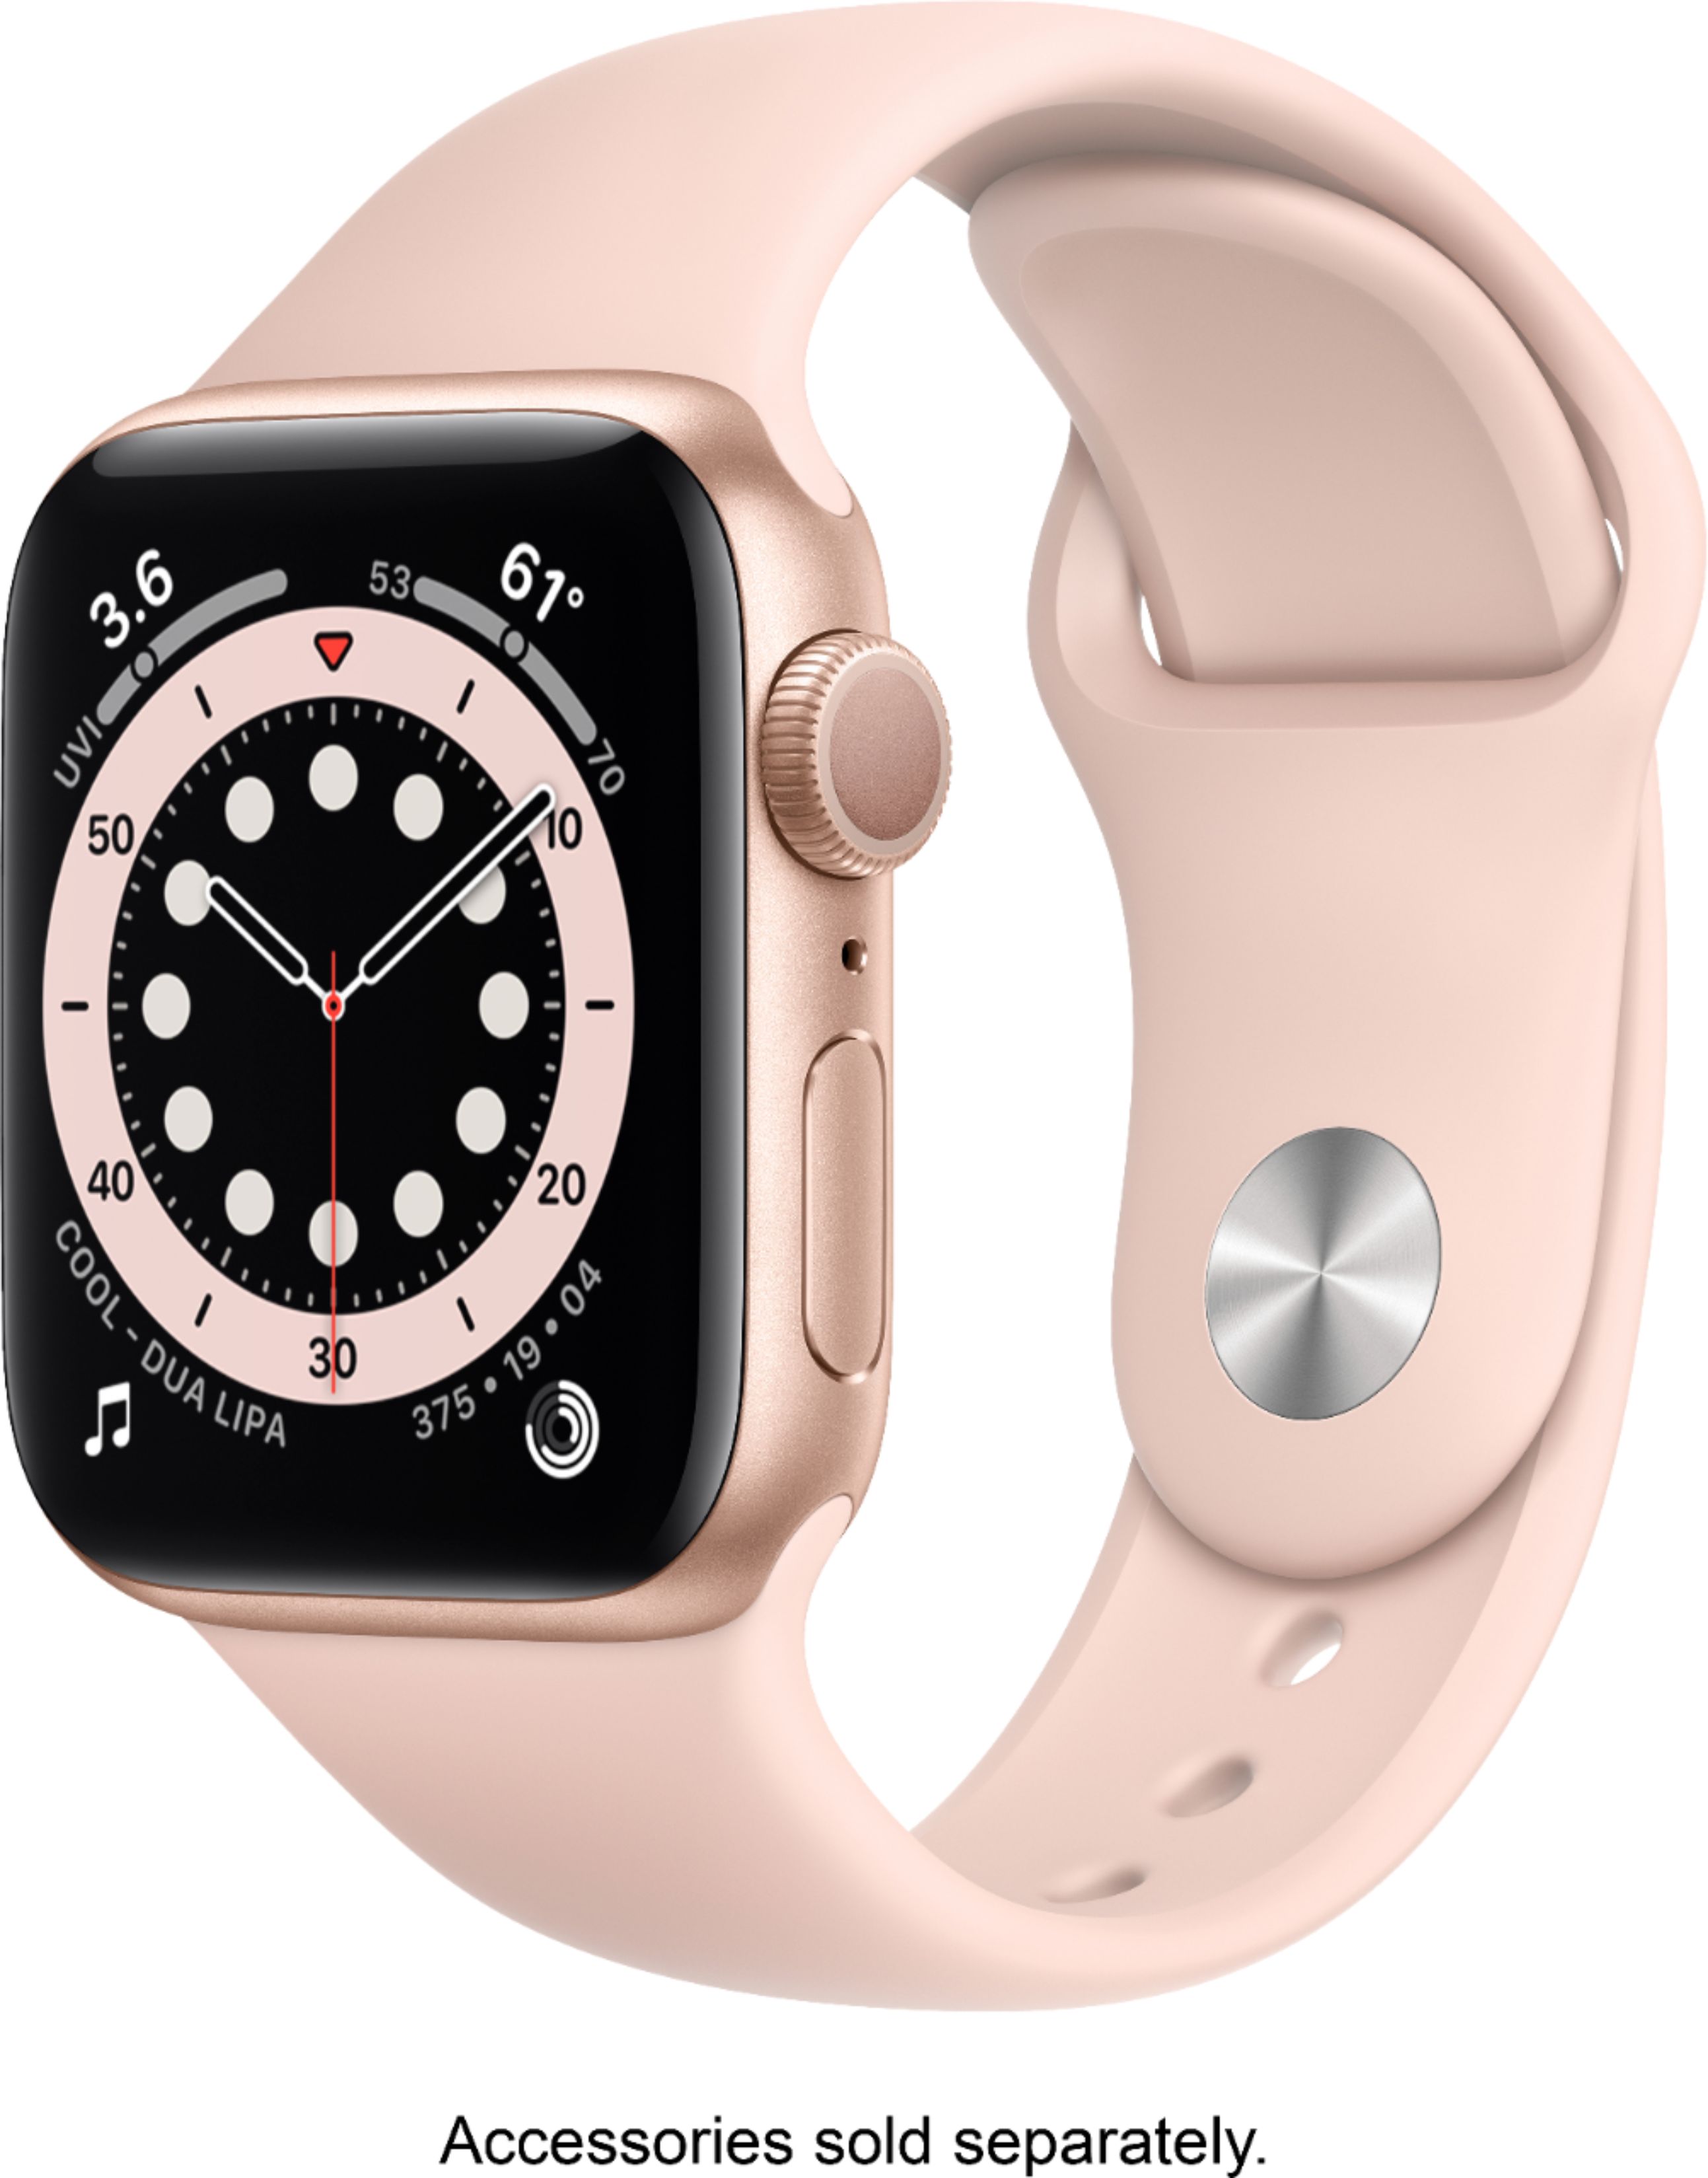 Apple Watch Series 6 (GPS) 40mm Gold Aluminum Case with Pink Sand Sport Band Gold MG123LL/A - $349